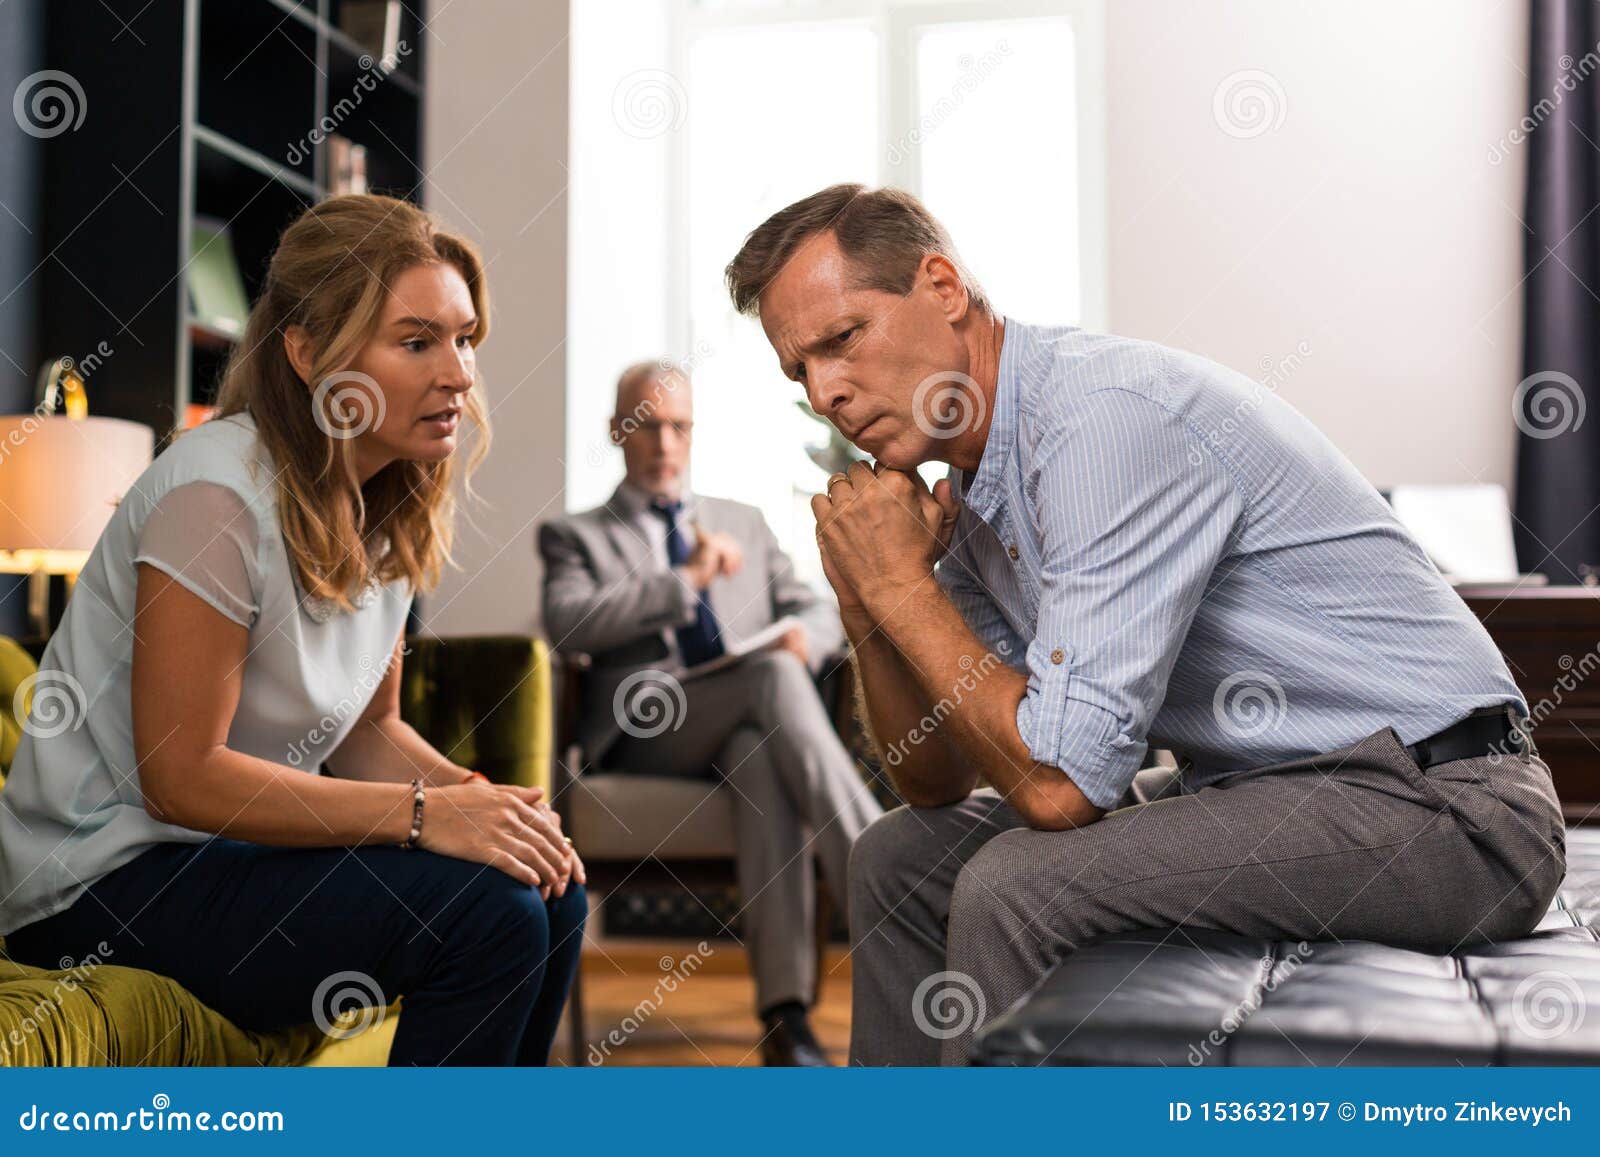 Wife Talking To Her Husband During The Session Stock Image Image Of